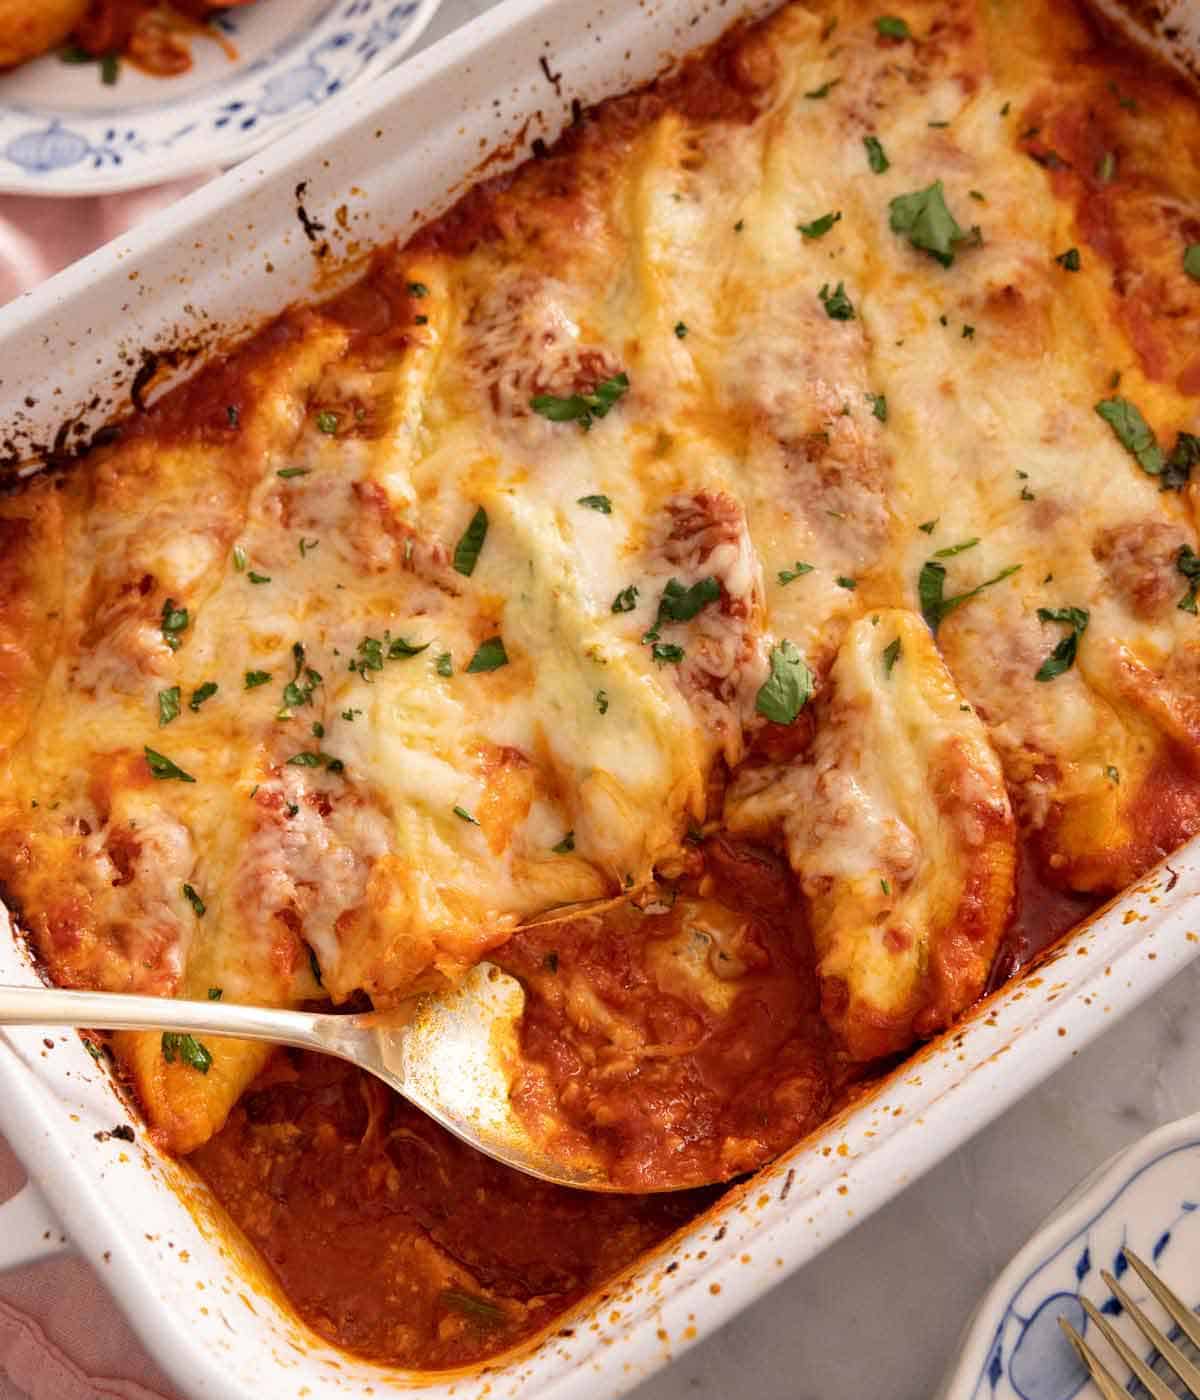 Overhead view of a baking dish with stuffed shells with a spoon inside.